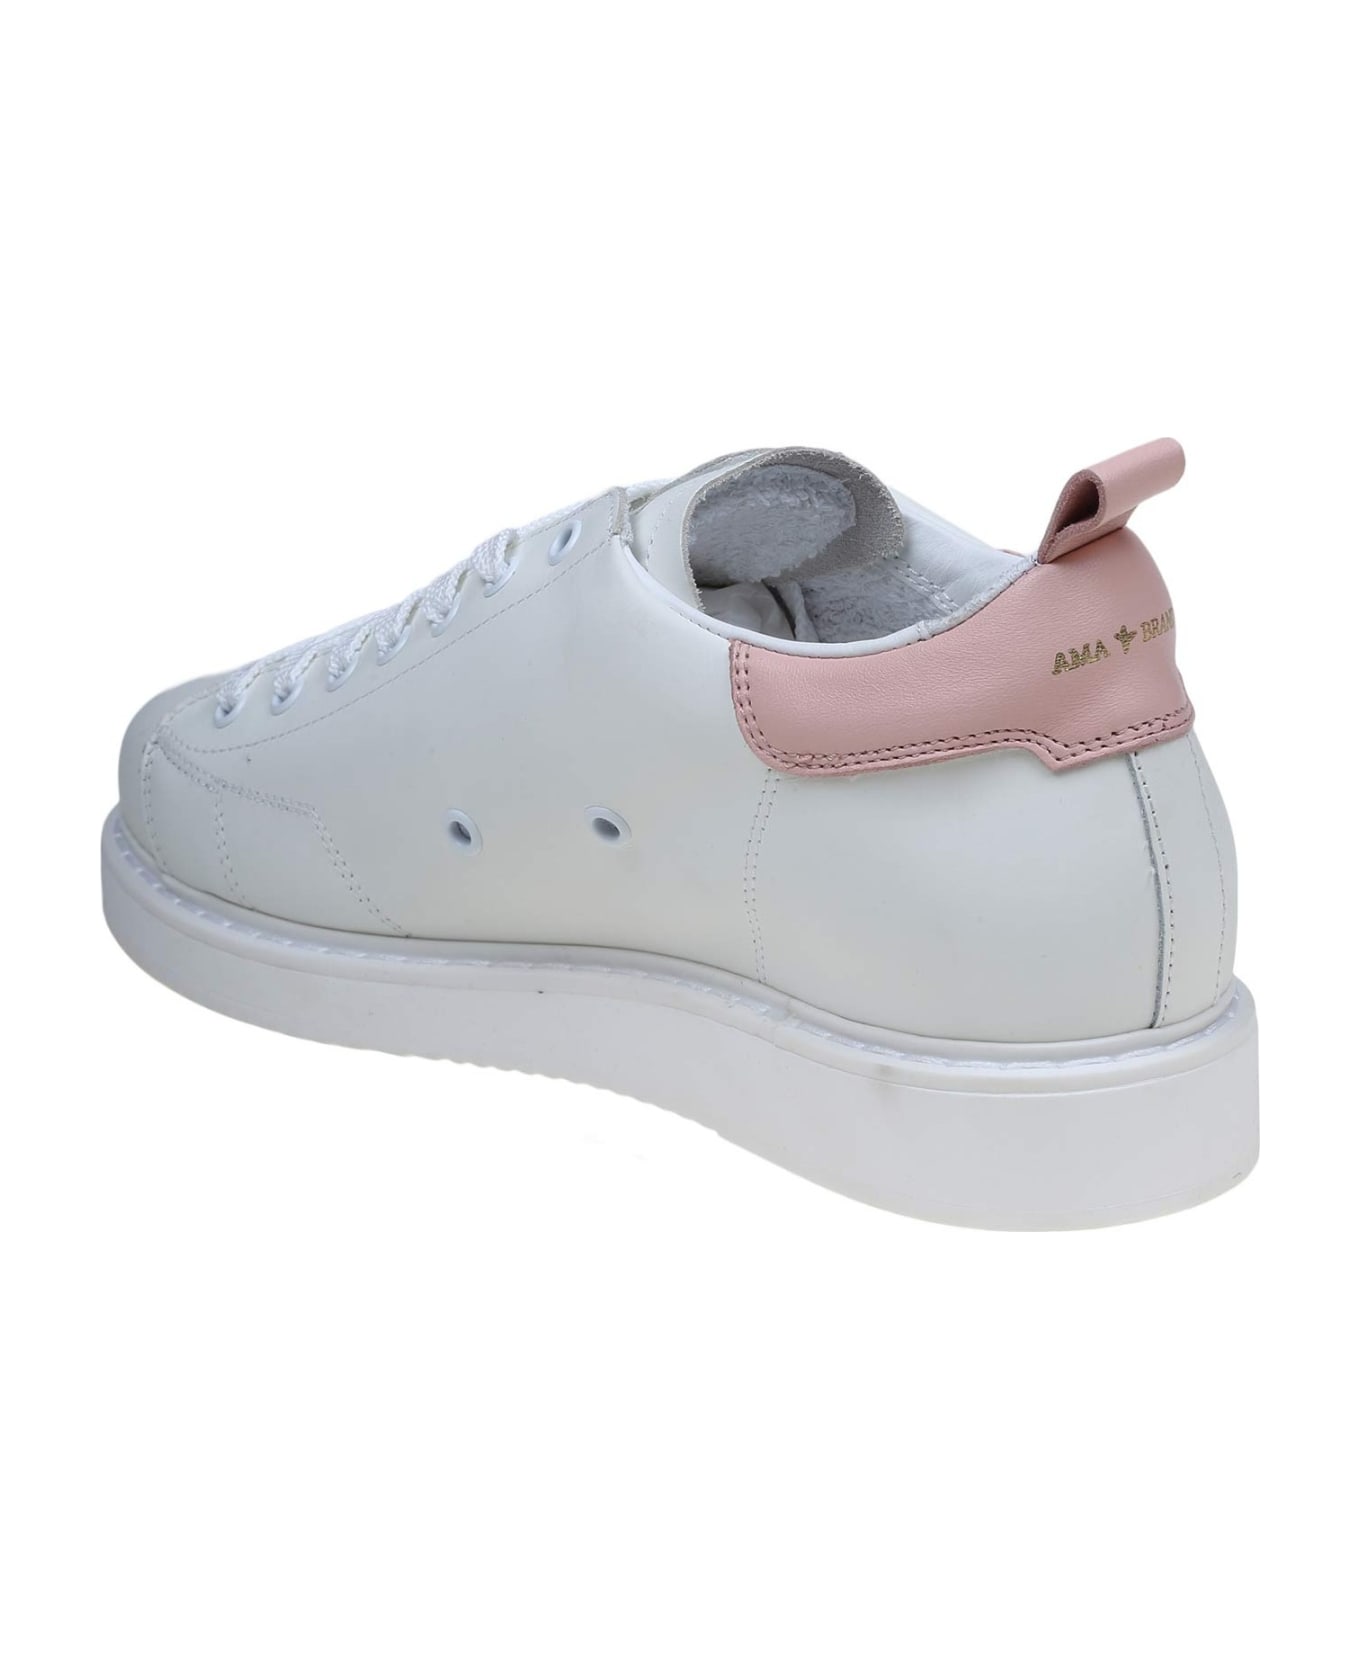 AMA-BRAND White And Pink Leather Sneakers - WHITE/PINK